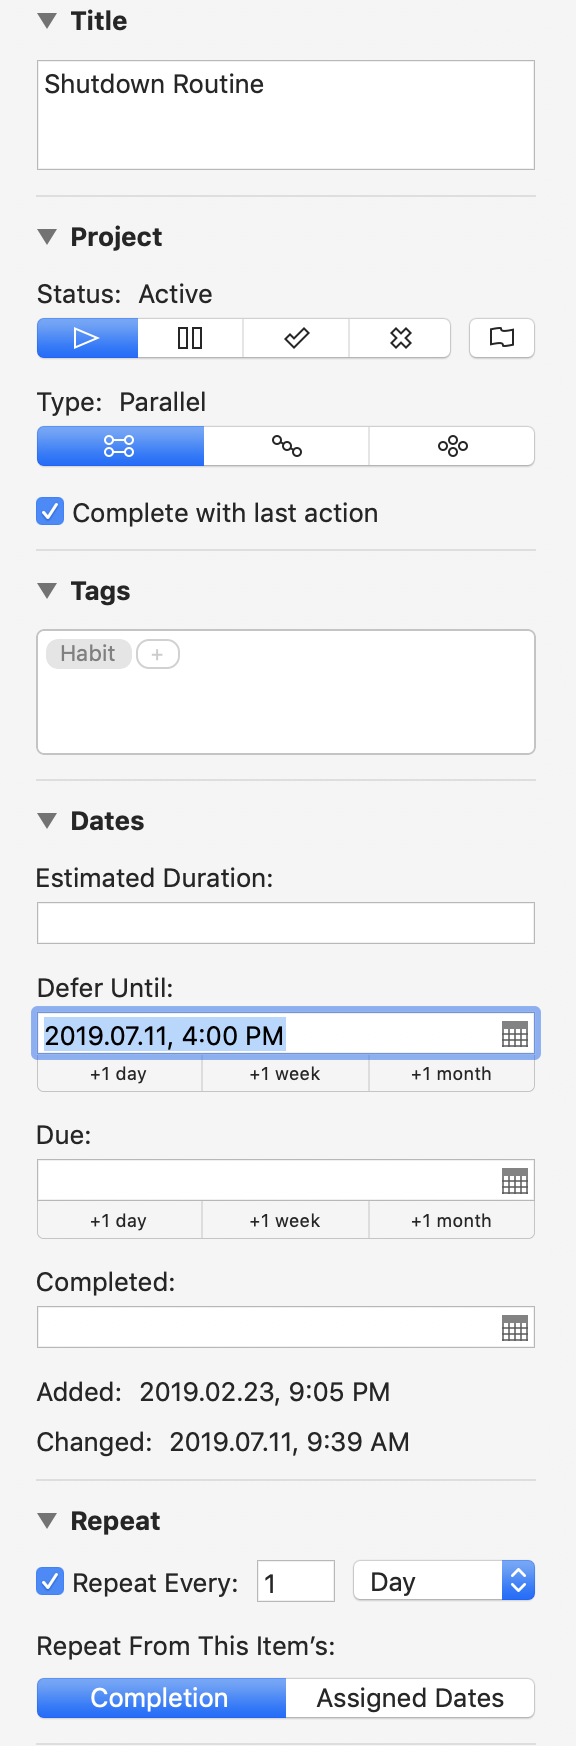 Screenshot showing the Shutdown Routine project setup in OmniFocus’s Inspector